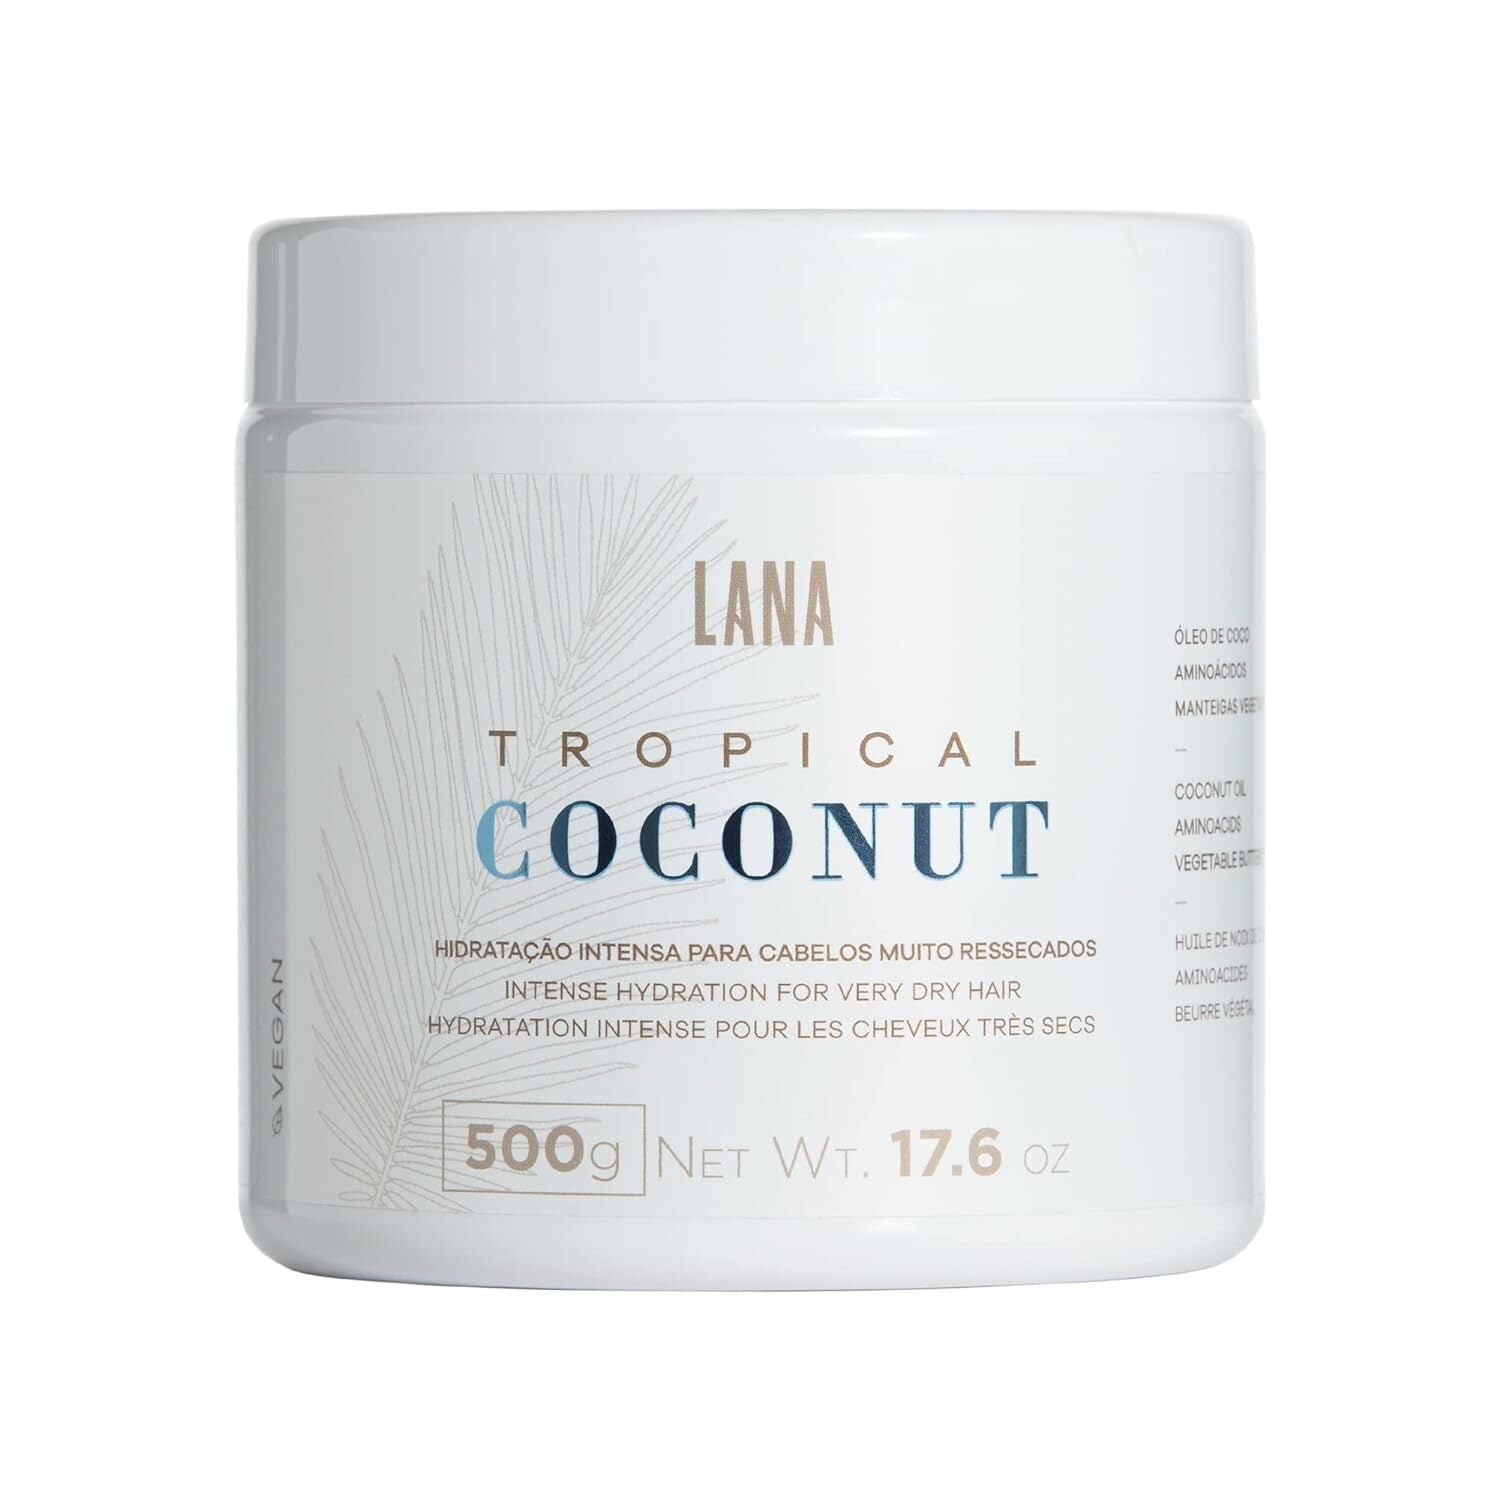 lana-brasiles-tropical-coconut-mask-intense-hydration-for-very-dry-hair